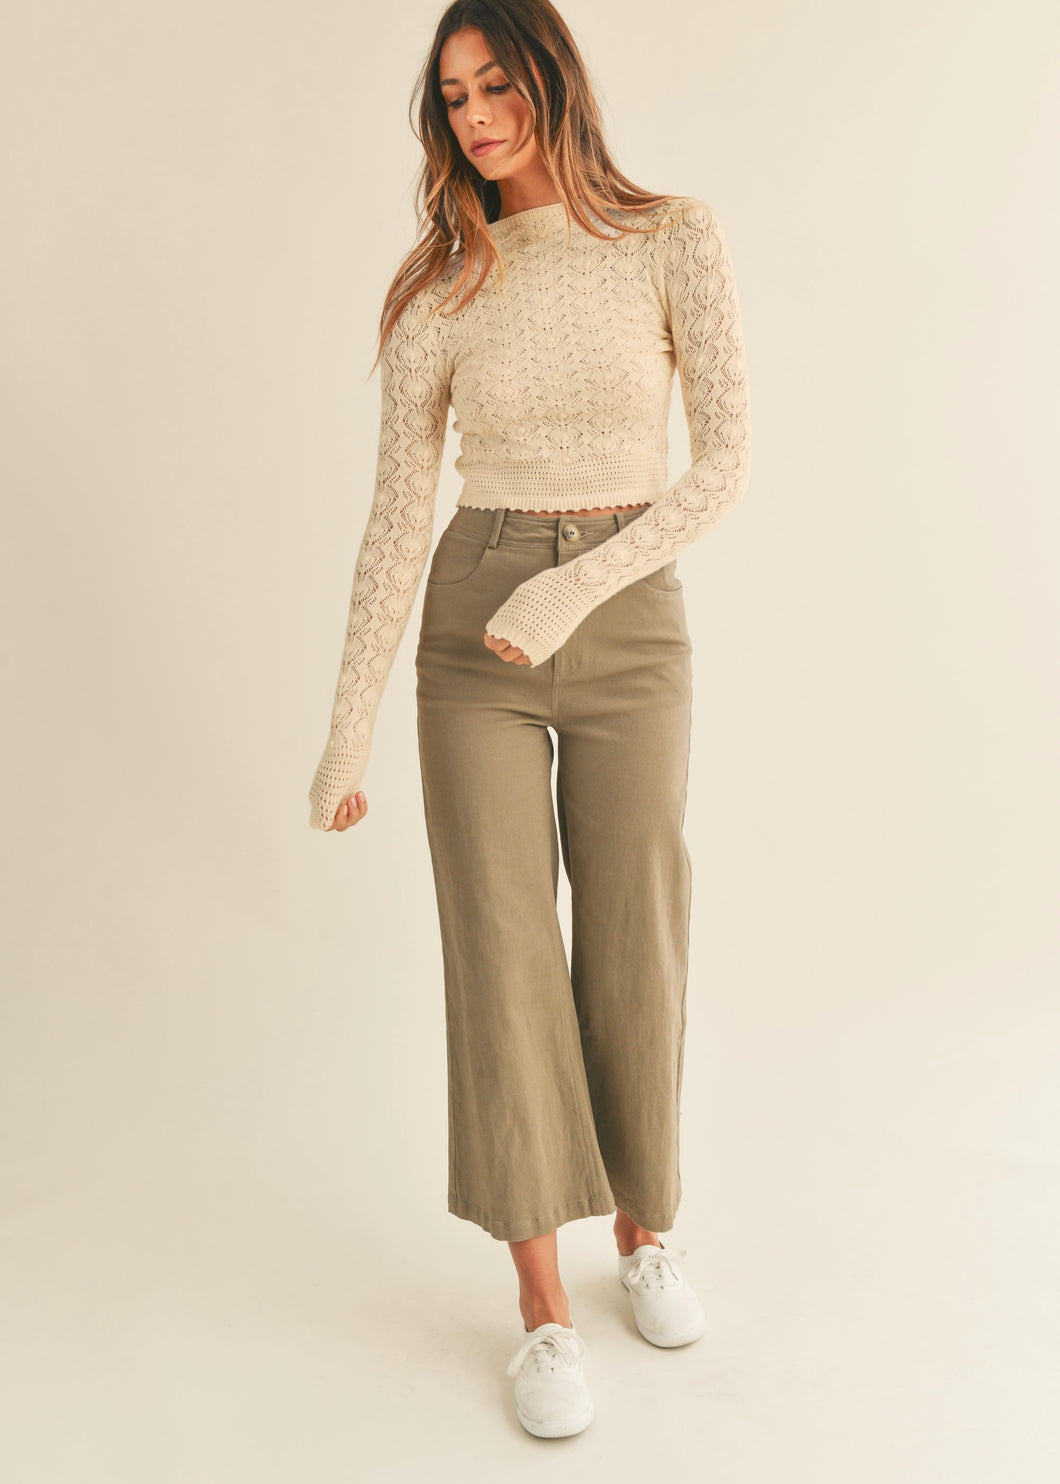 Pointelle Mock Neck Sweater (2 Colors)